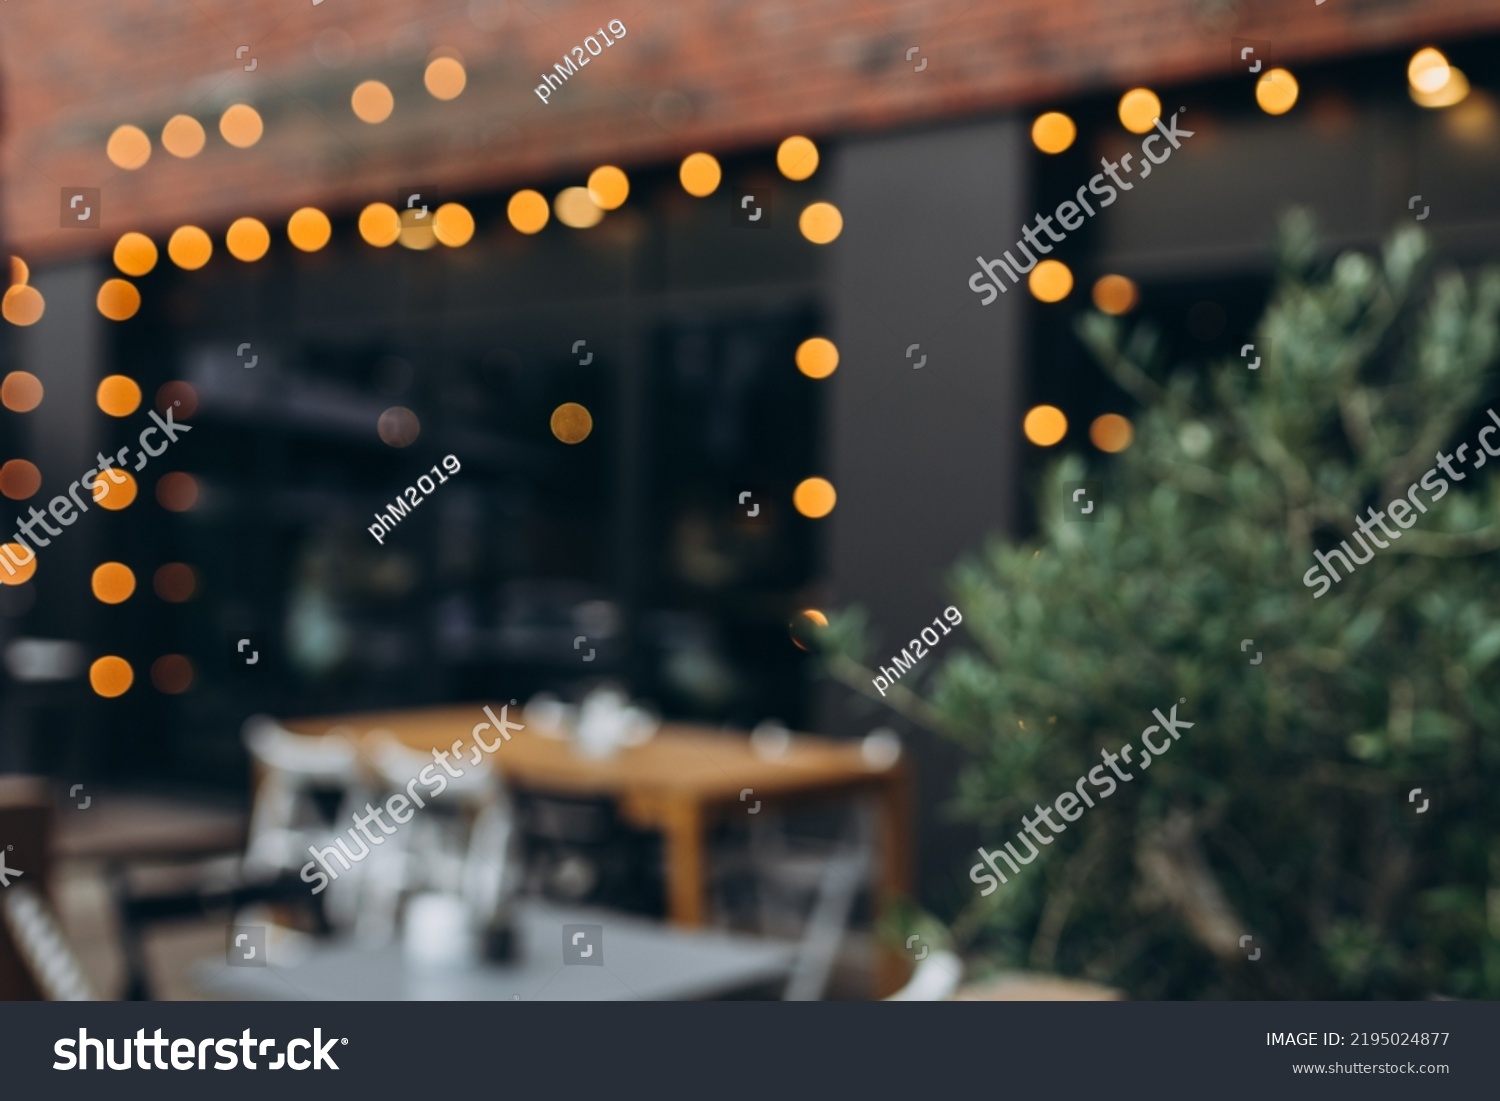 Blurred background of outdoor restaurant with abstract bokeh light. Outdoor cafe with tables and chairs #2195024877